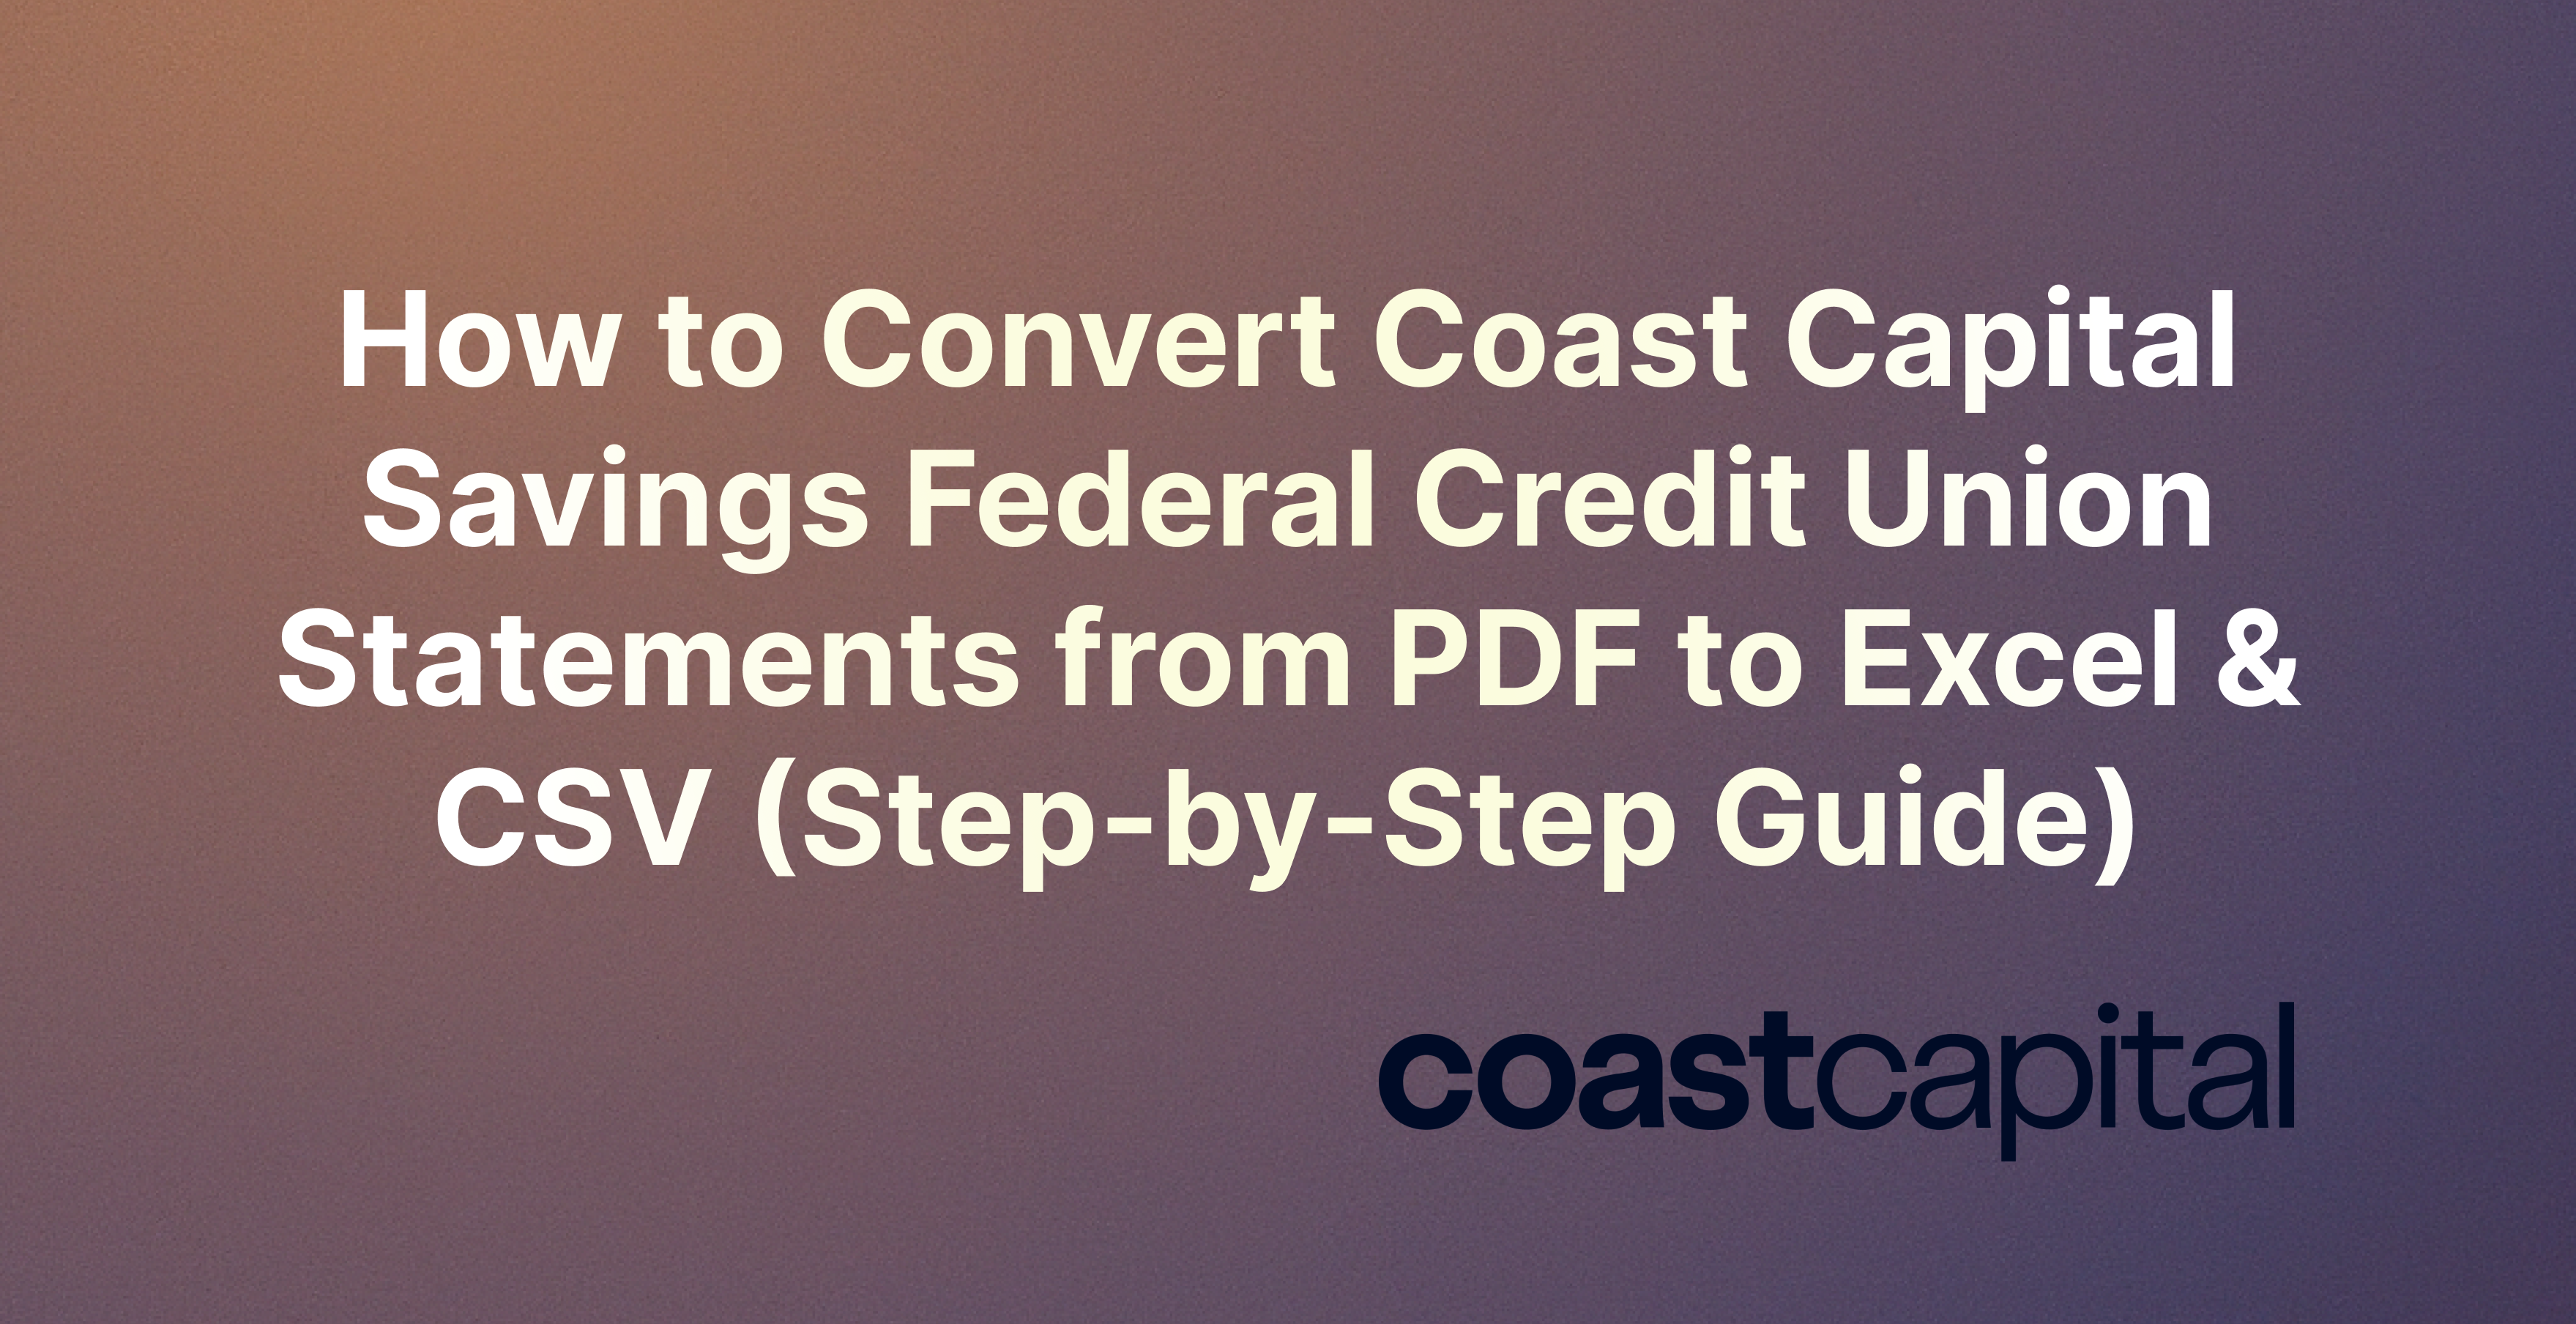 How to Convert Coast Capital Savings Federal Credit Union Statements from PDF to Excel & CSV (Step-by-Step Guide)